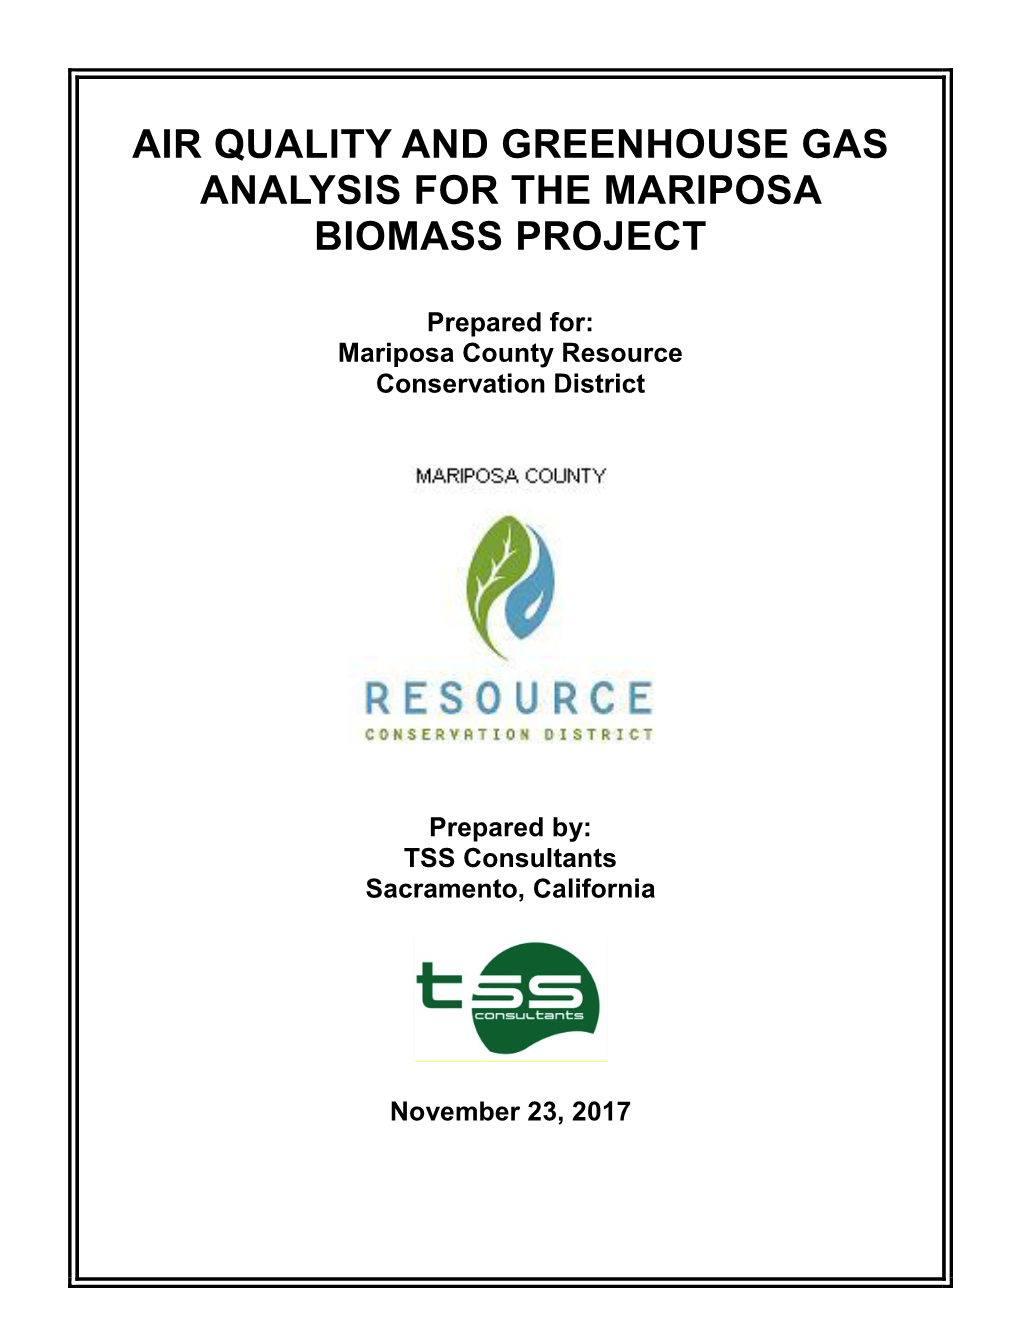 Air Quality and Greenhouse Gas Analysis for the Mariposa Biomass Project